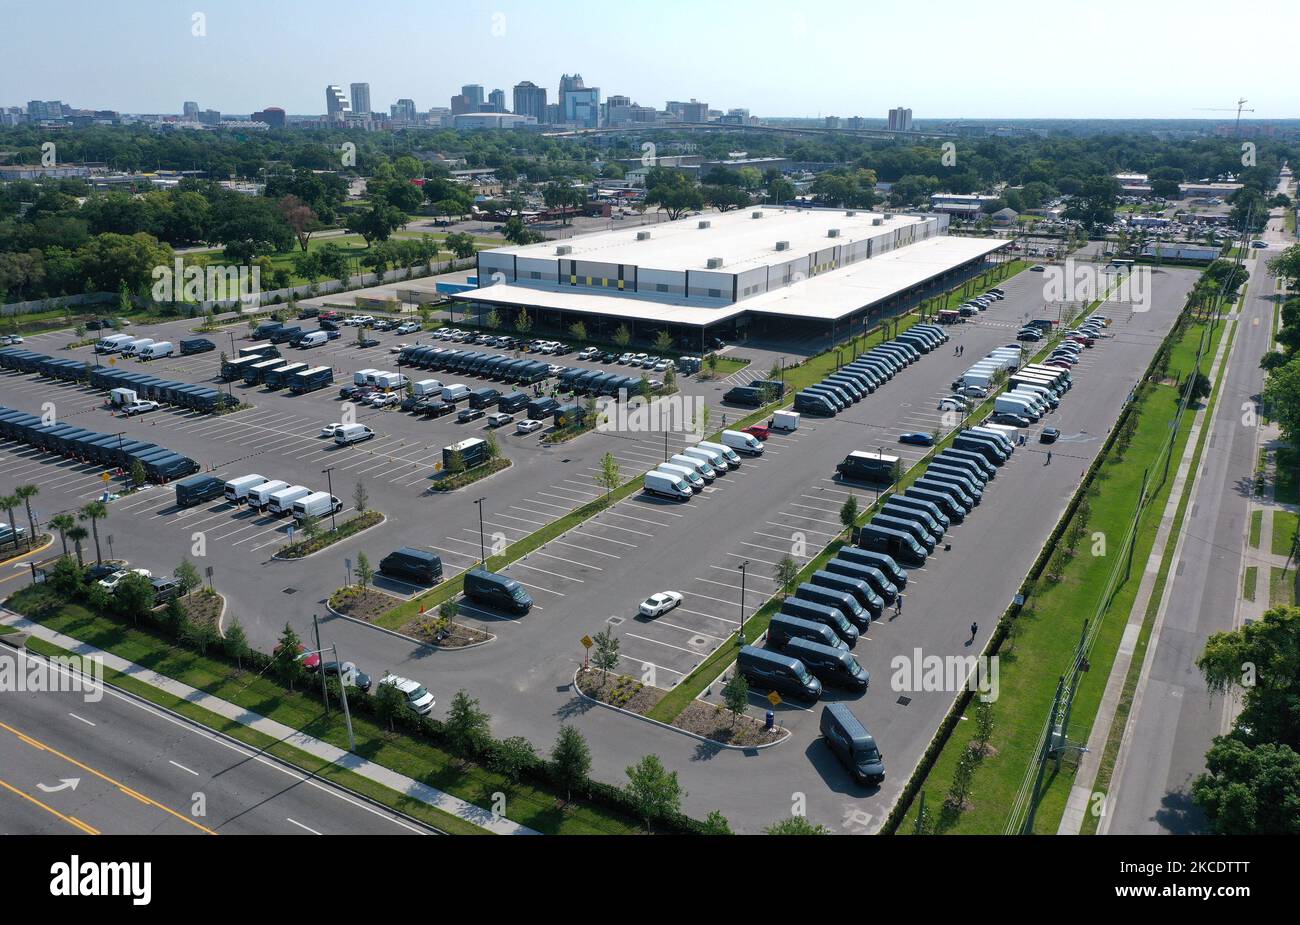 May 1, 2021 - Orlando, Florida, United States - In this aerial view from a drone, delivery vans are seen parked at an Amazon last-mile delivery facility on May 1, 2021 in Orlando, Florida. Amazon announced that it will hold it annual two-day Prime Day shopping event in its second quarter, rather than July, to boost spending in what is typically a slower time for retail sales. (Photo by Paul Hennessy/NurPhoto) Stock Photo